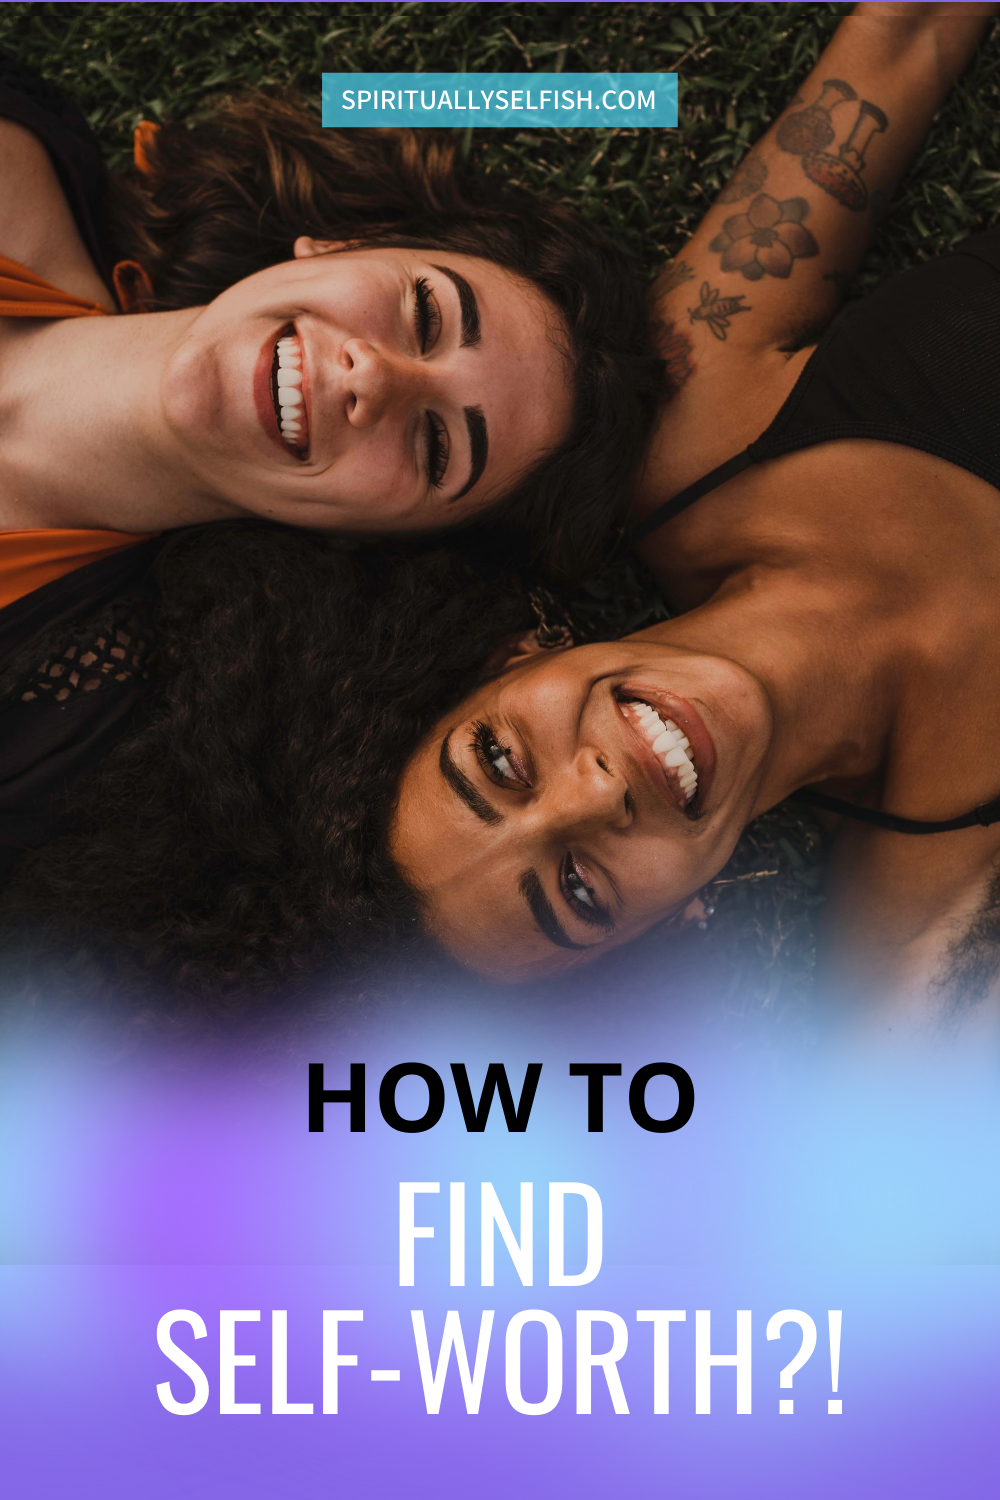 How To Find Self-Worth